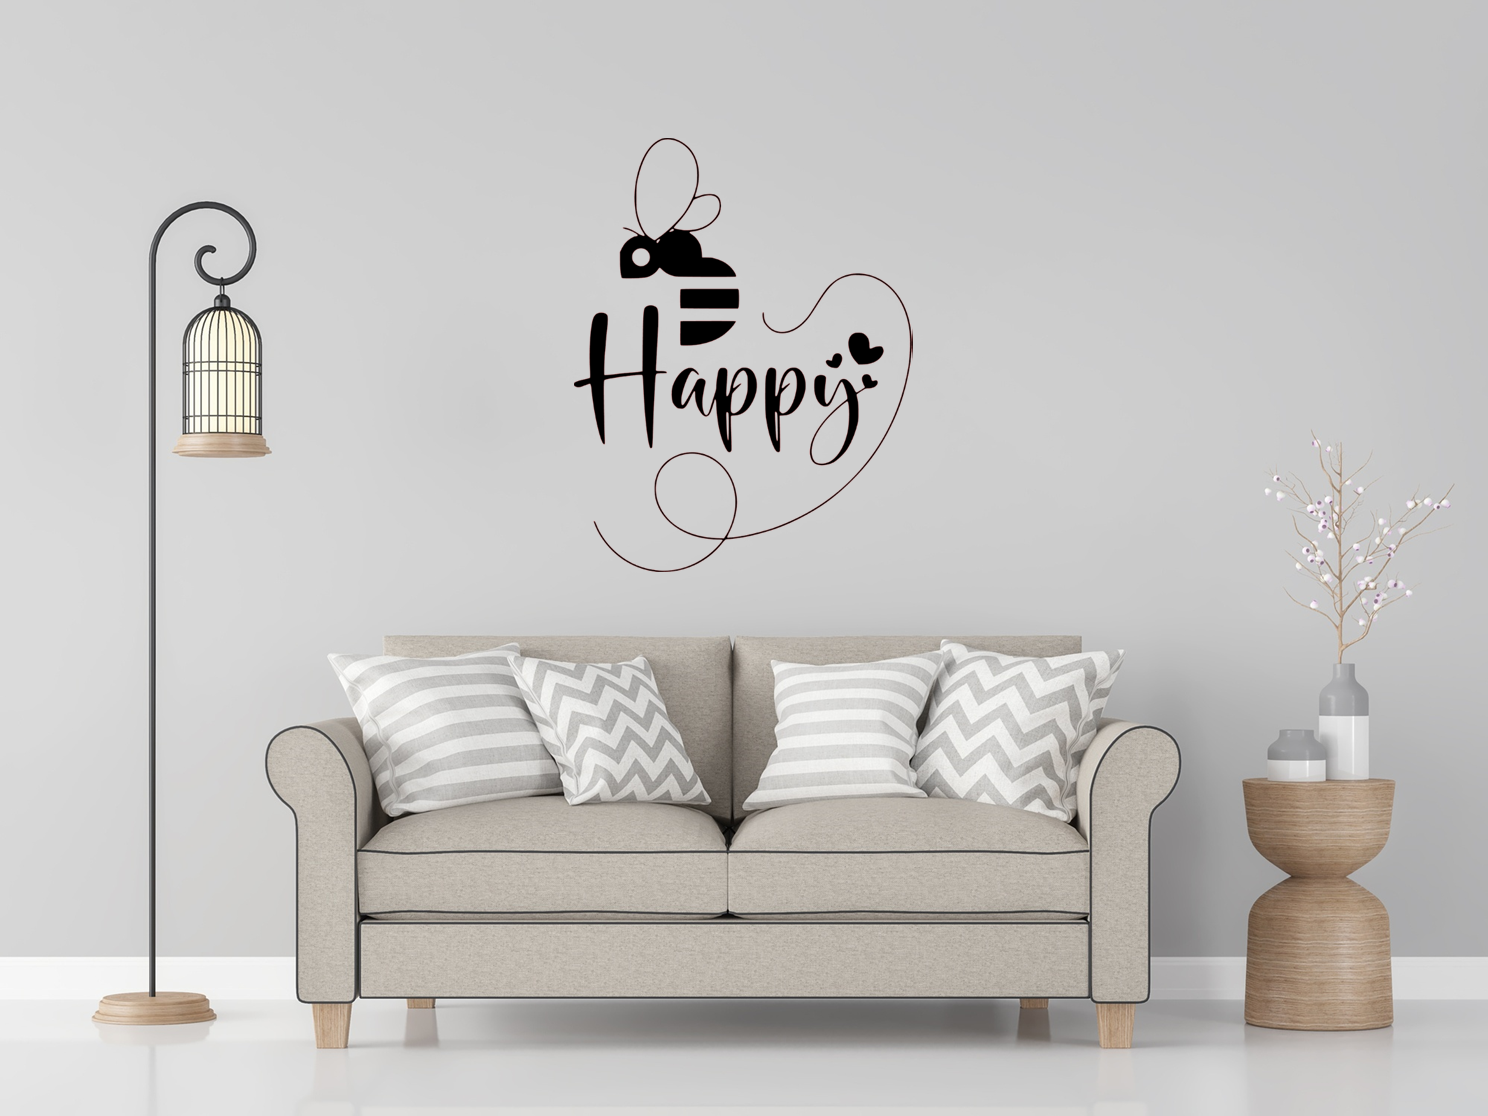 Be Happy Decal Stickers